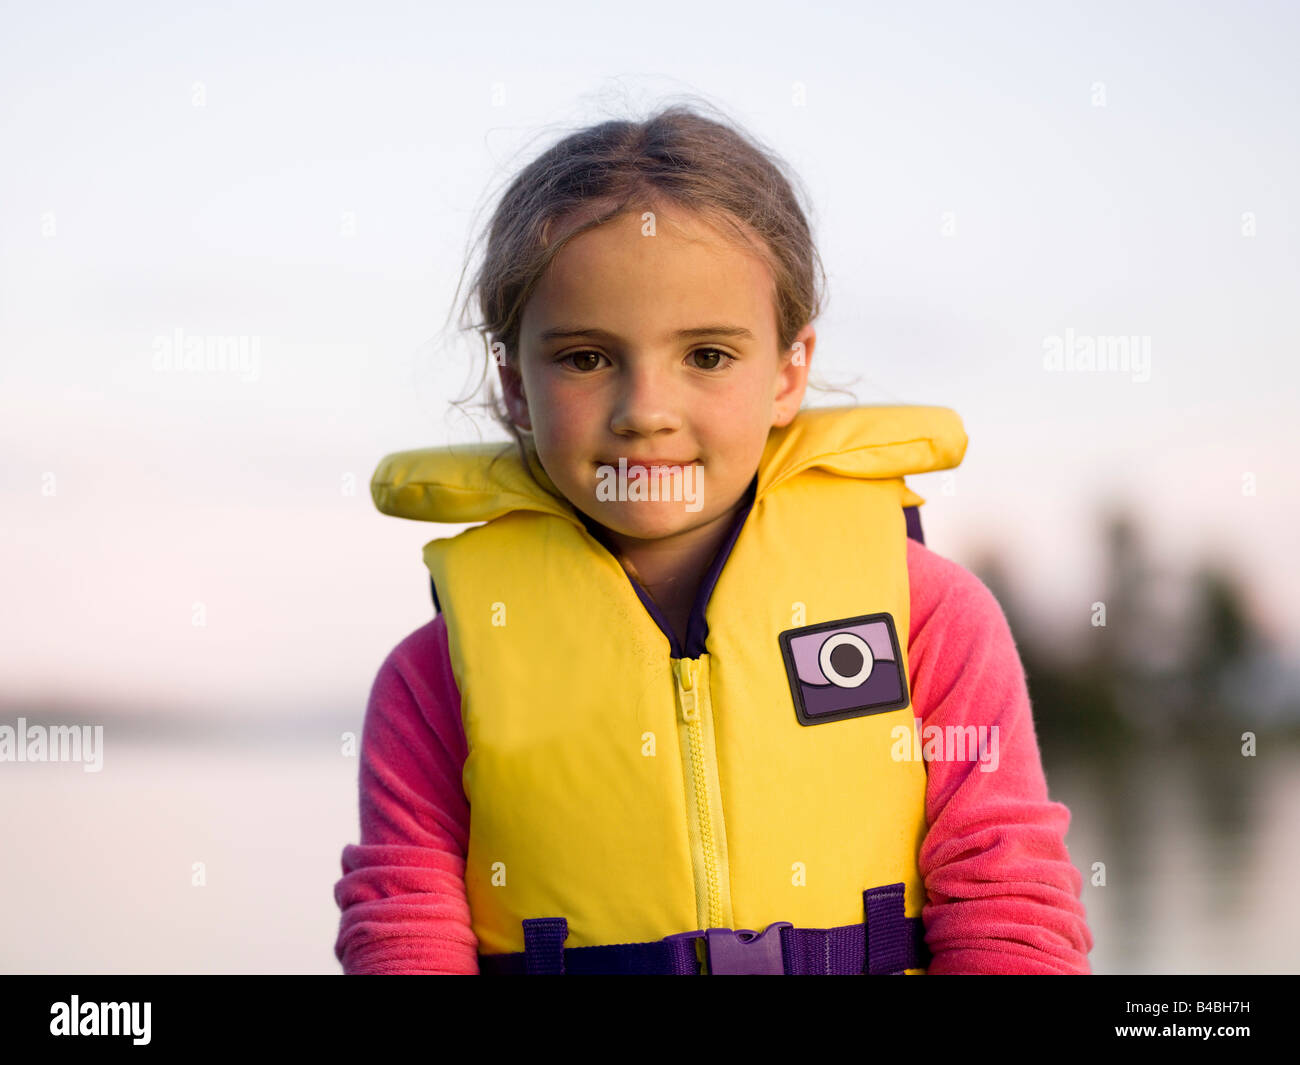 Girl in a personal floatation device Stock Photo